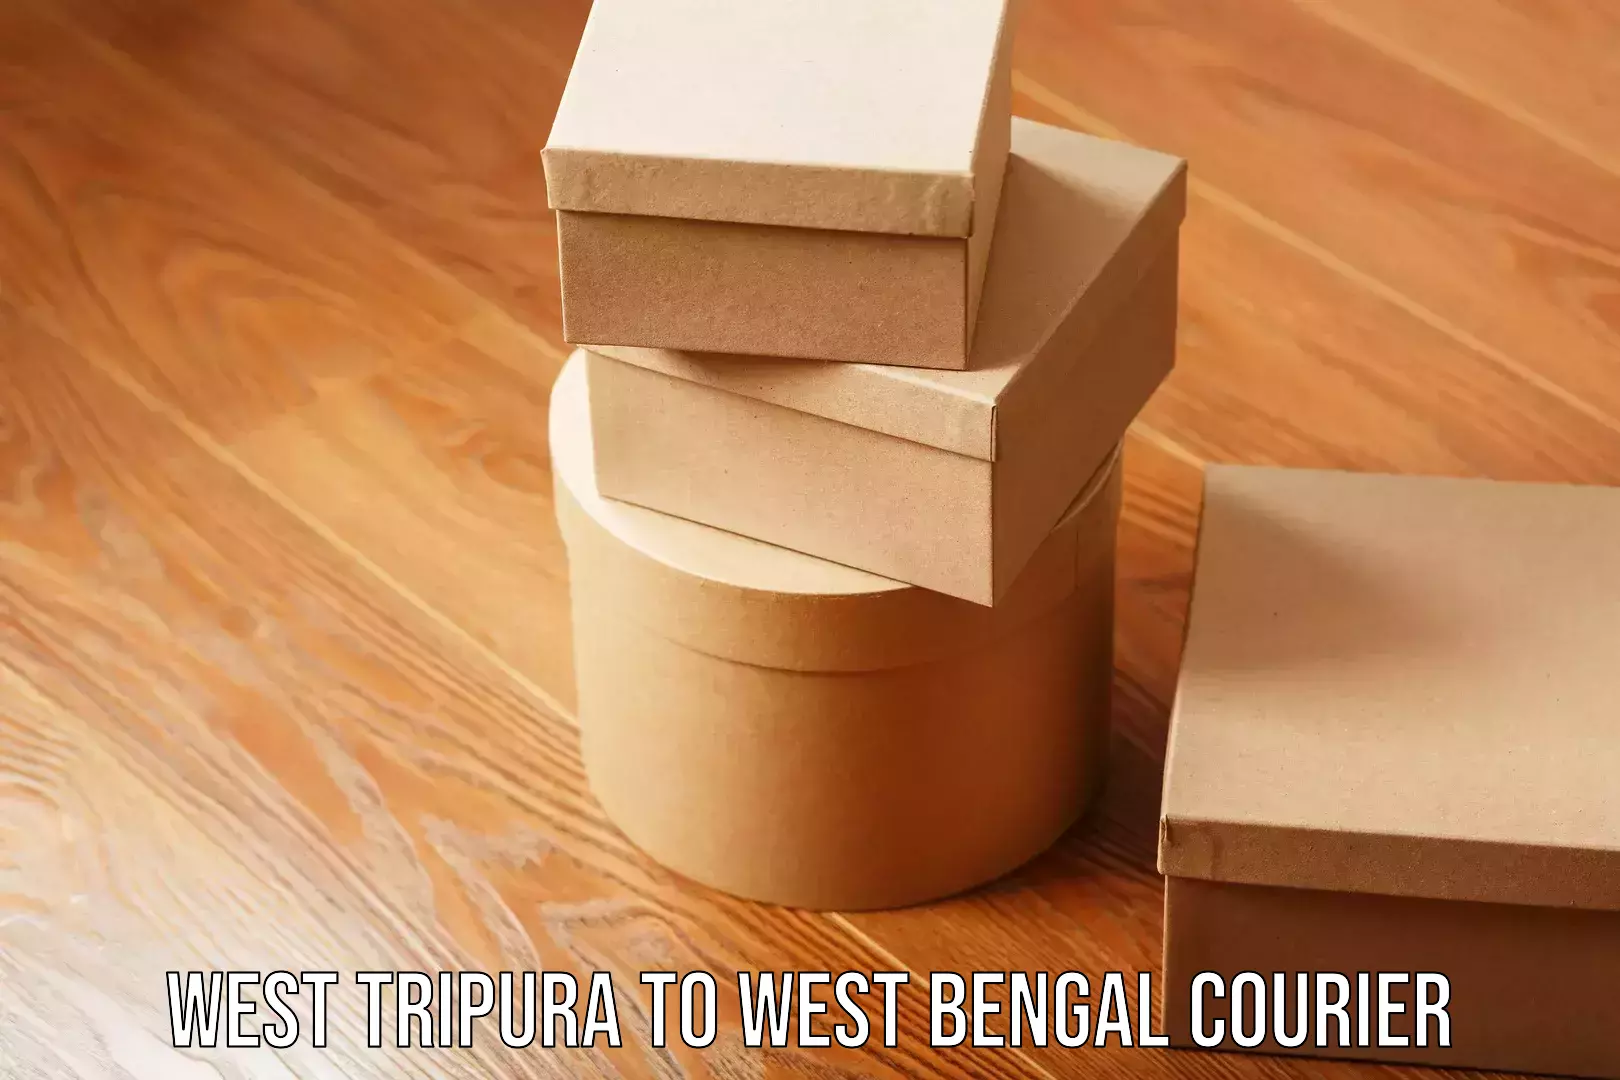 Advanced package delivery West Tripura to West Bengal